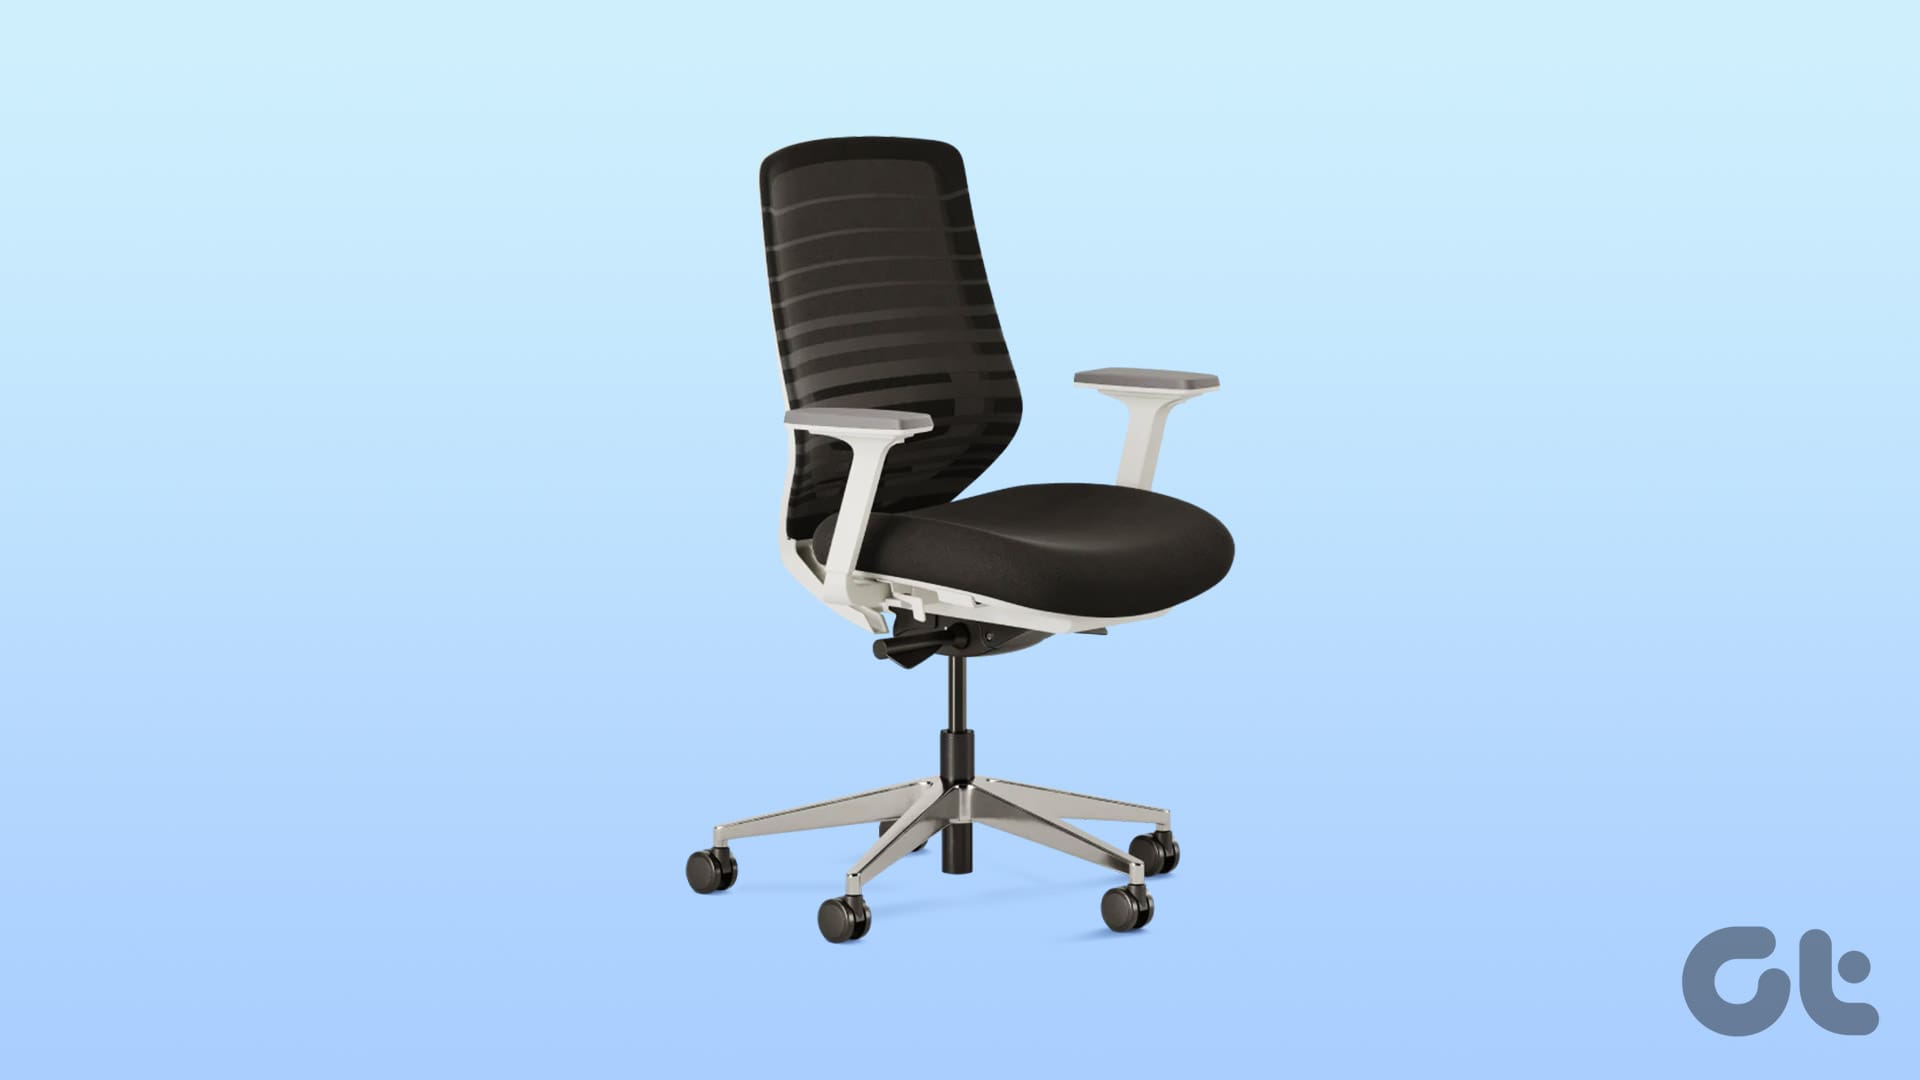 5 Best Compact Office Chairs with Lumbar Support - Guiding Tech